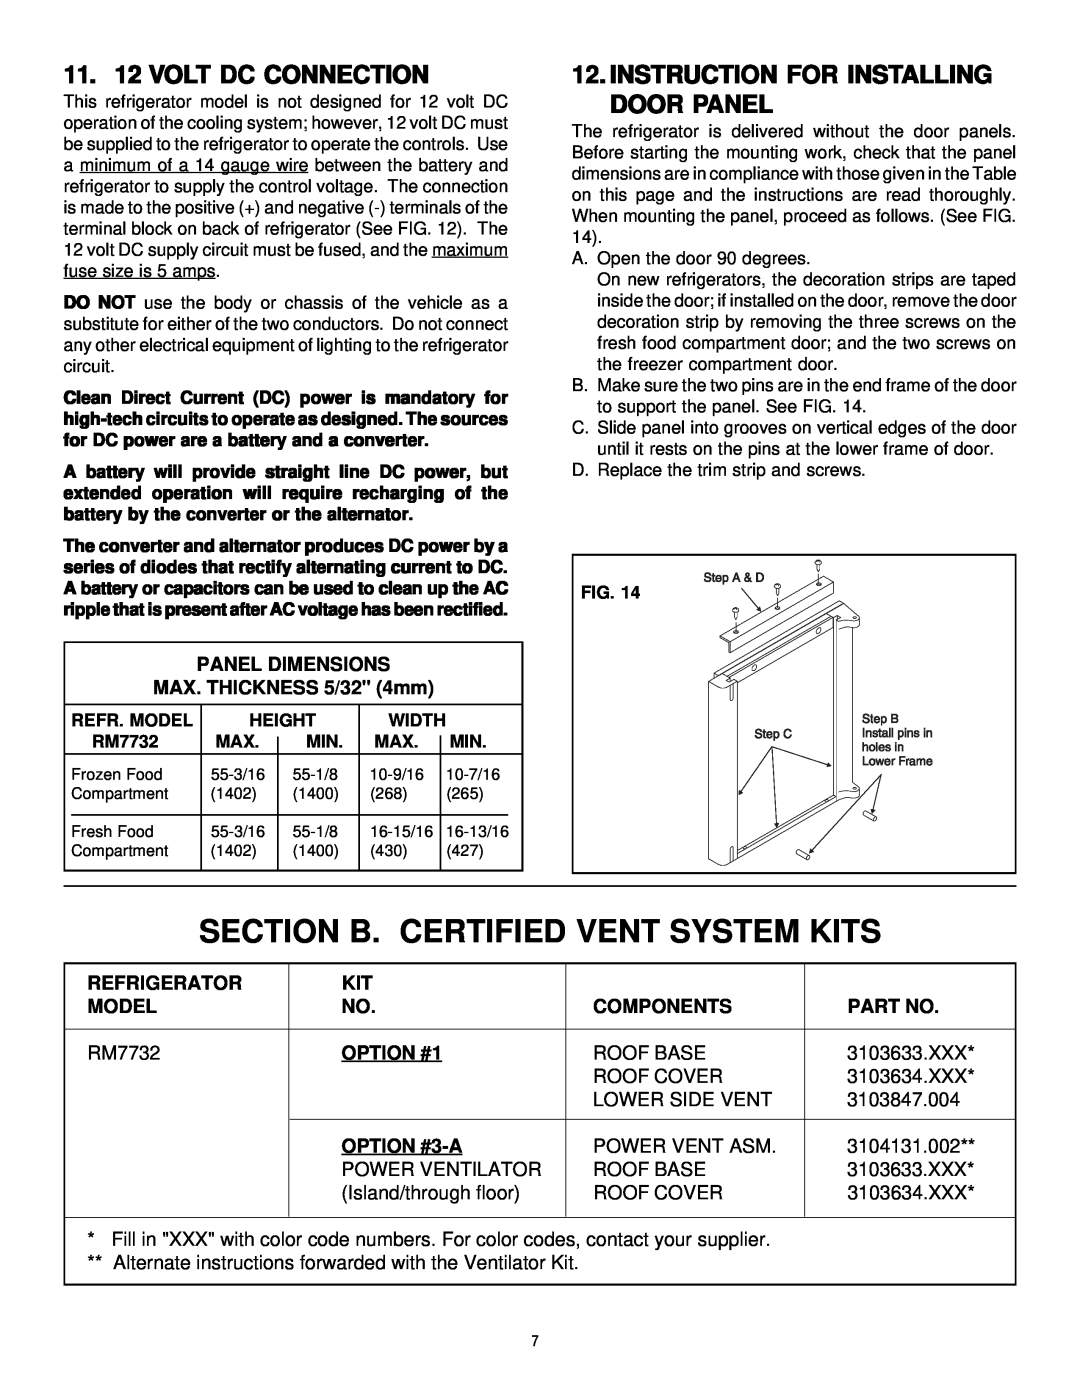 Dometic Elite RM7732 Section B. Certified Vent System Kits, 11. 12 VOLT DC CONNECTION, Refrigerator, Model, Components 